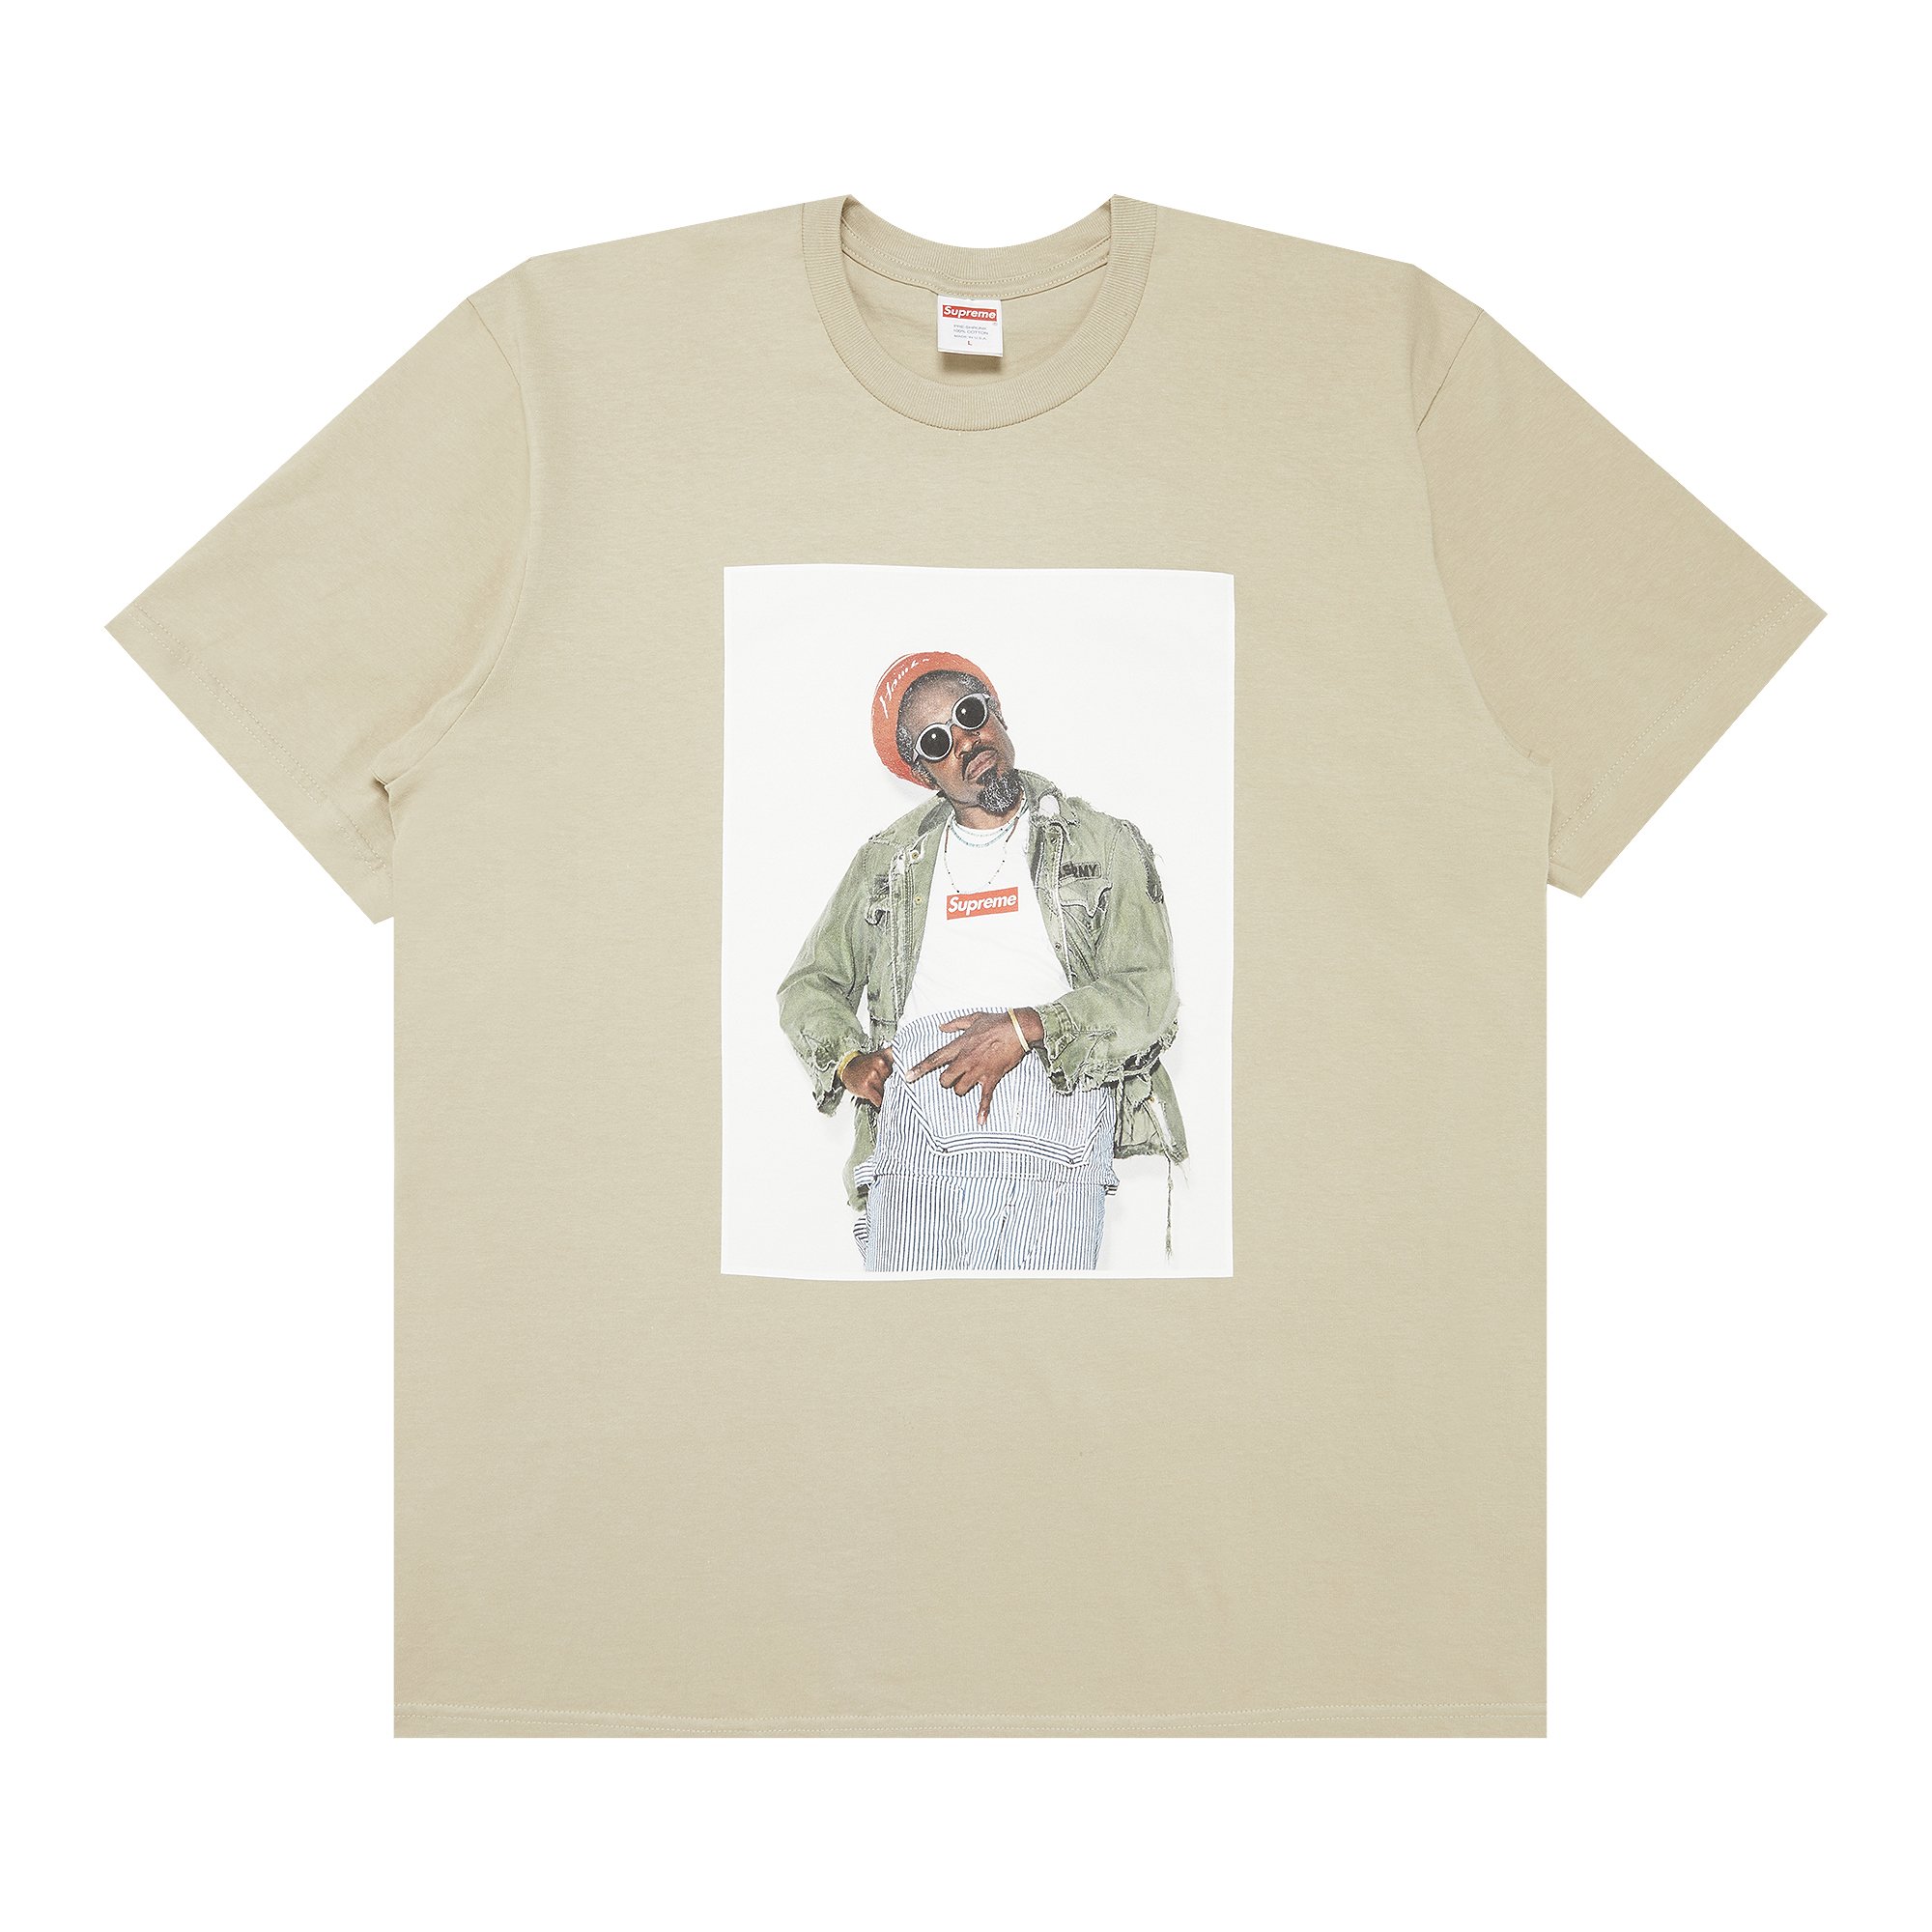 Buy Supreme André 3000 Tee 'Stone' - FW22T51 STONE | GOAT